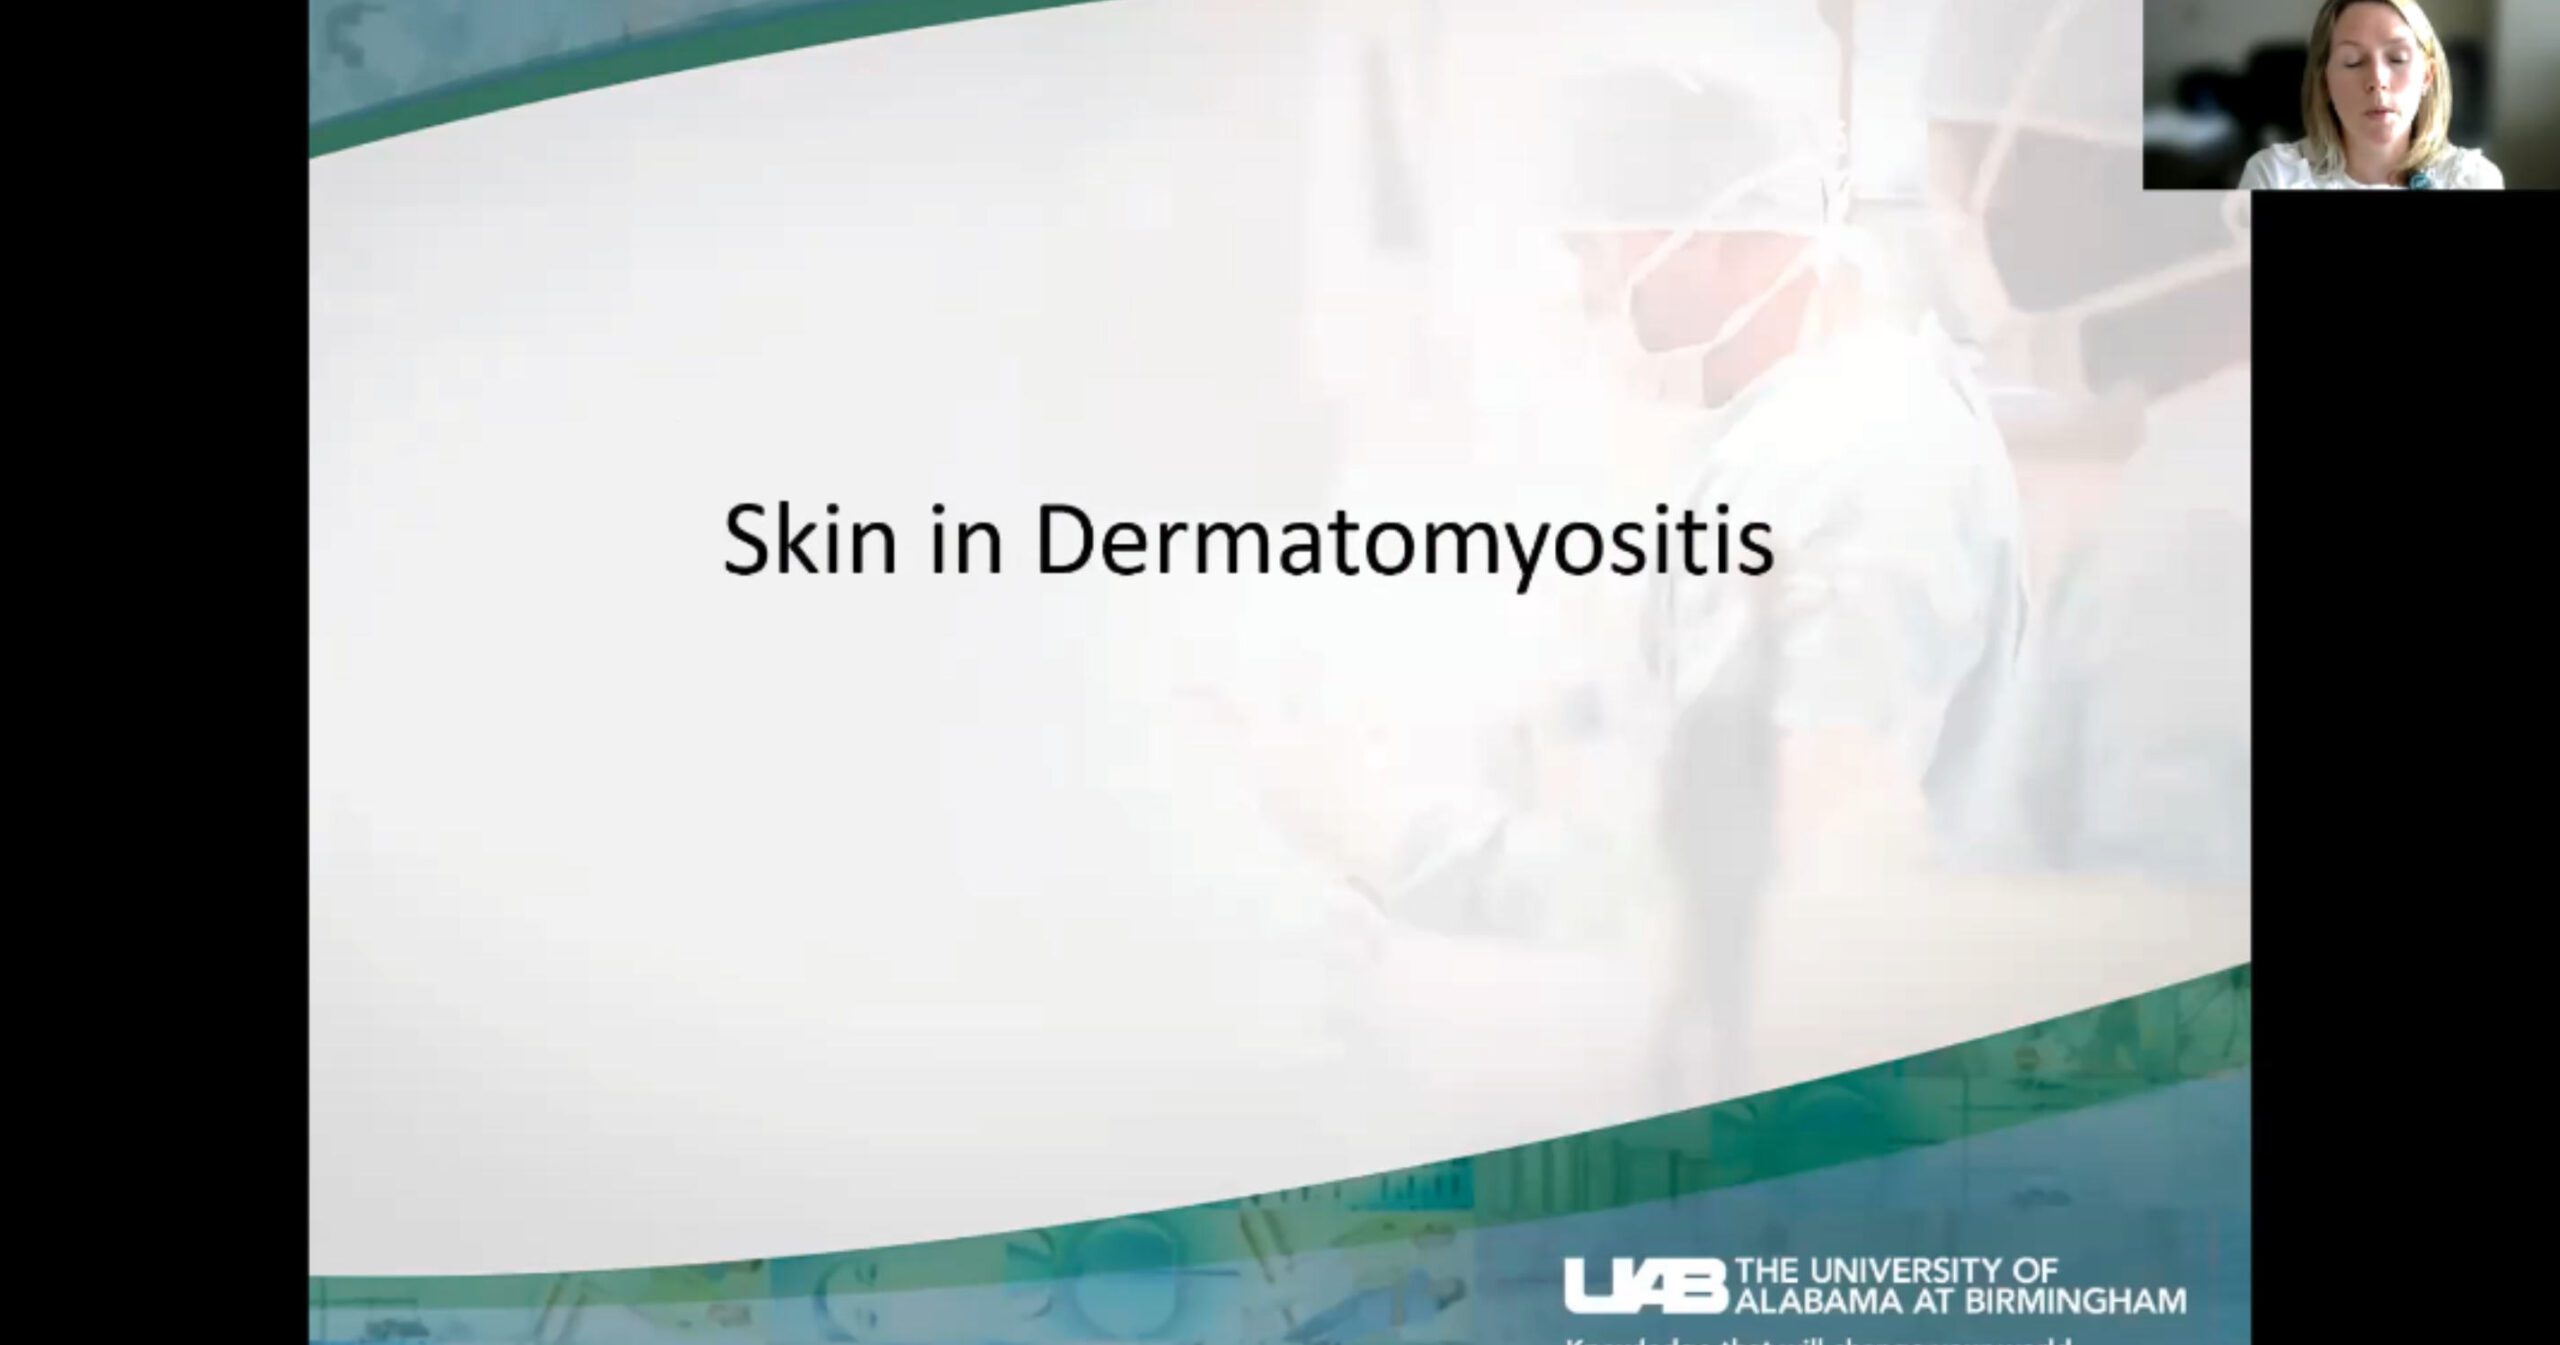 Dr. Graham educates about the skin manifestations of myositis, sharing the various DM rashes, cosmetic cover-ups, information and tips for dry skin and itching, scalp itch, and info about digital ulcers, cuticles, Raynaud's, and more. This is an excellent overview.